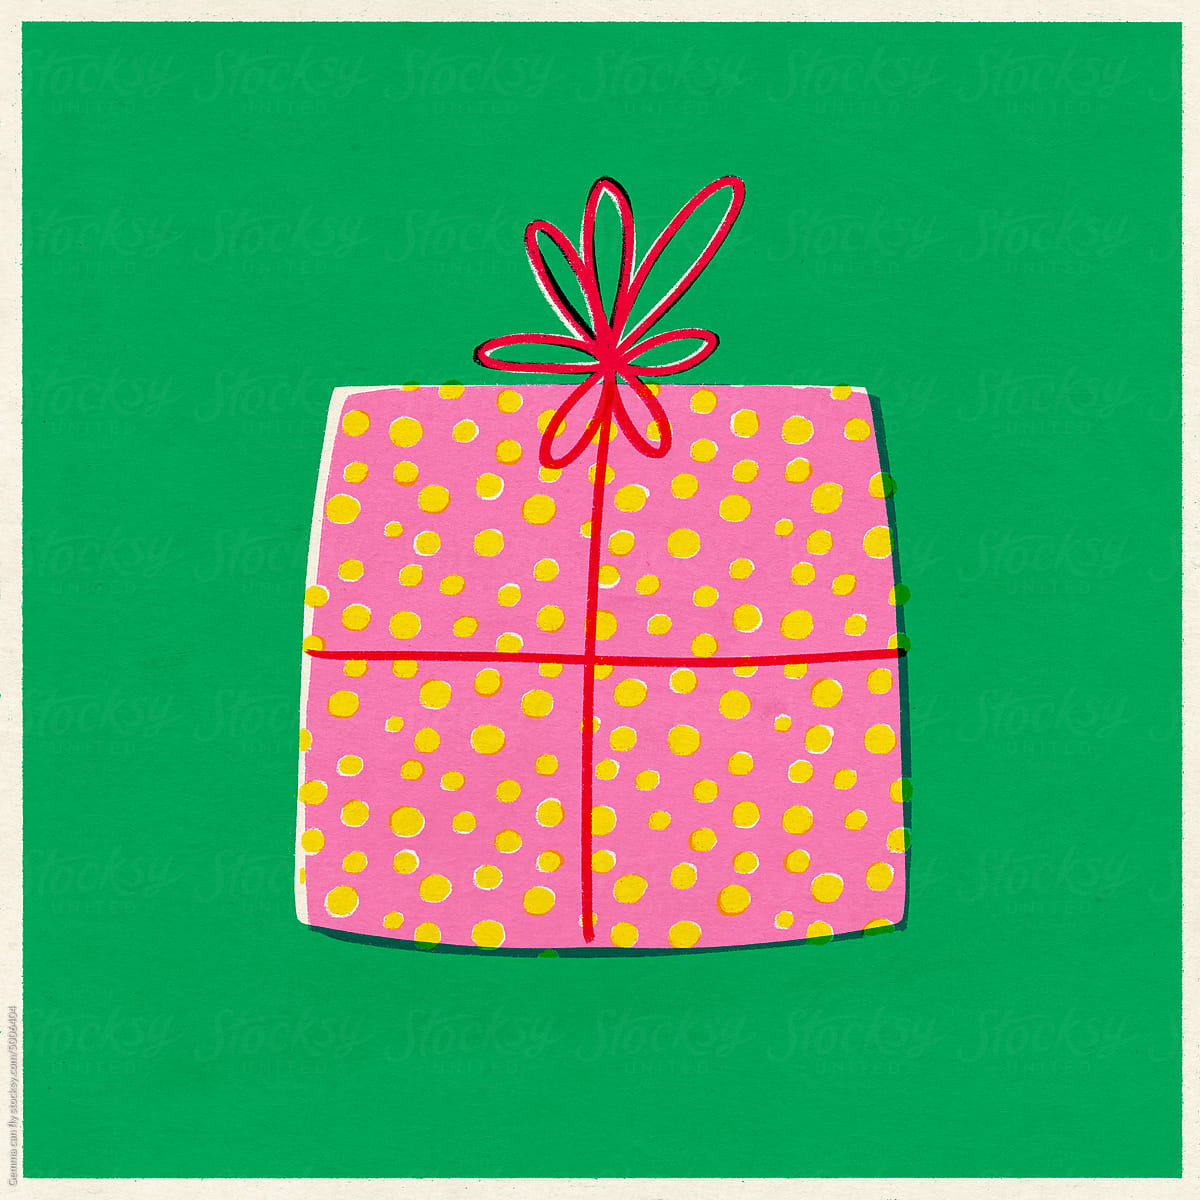 Retro gift with a bow. Minimal concept illustration